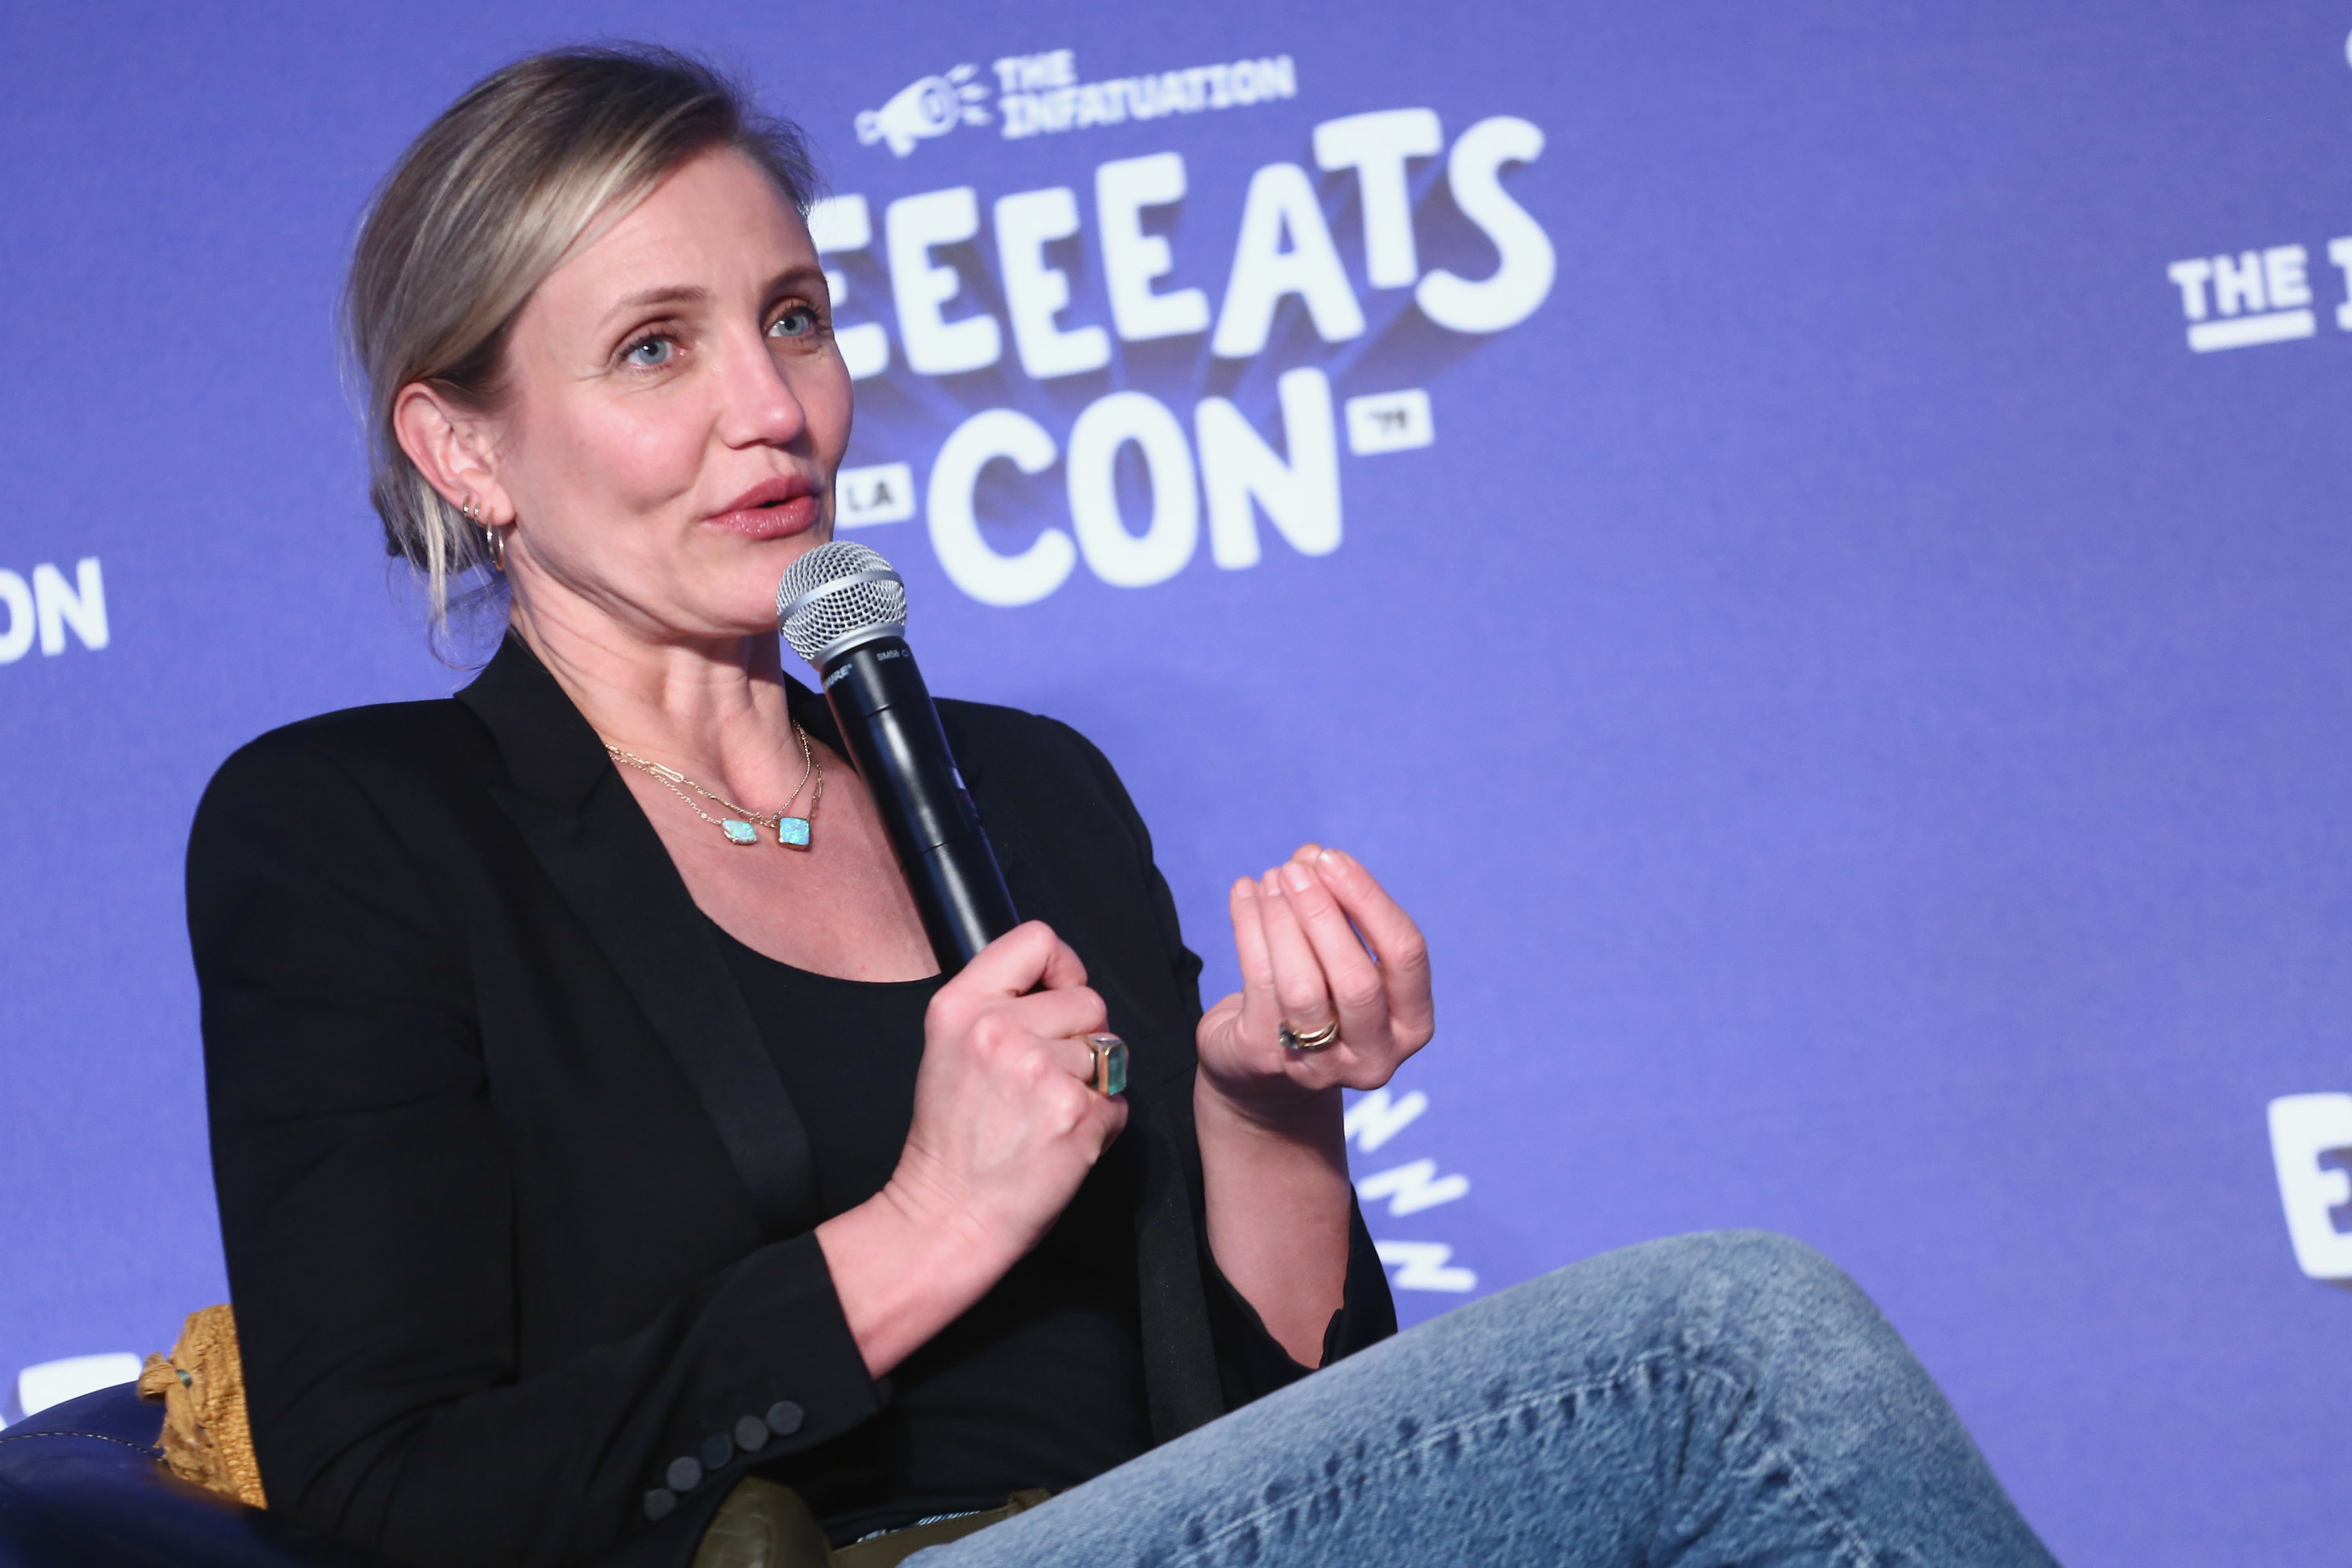 Cameron Diaz holding a mic and speaking on a panel